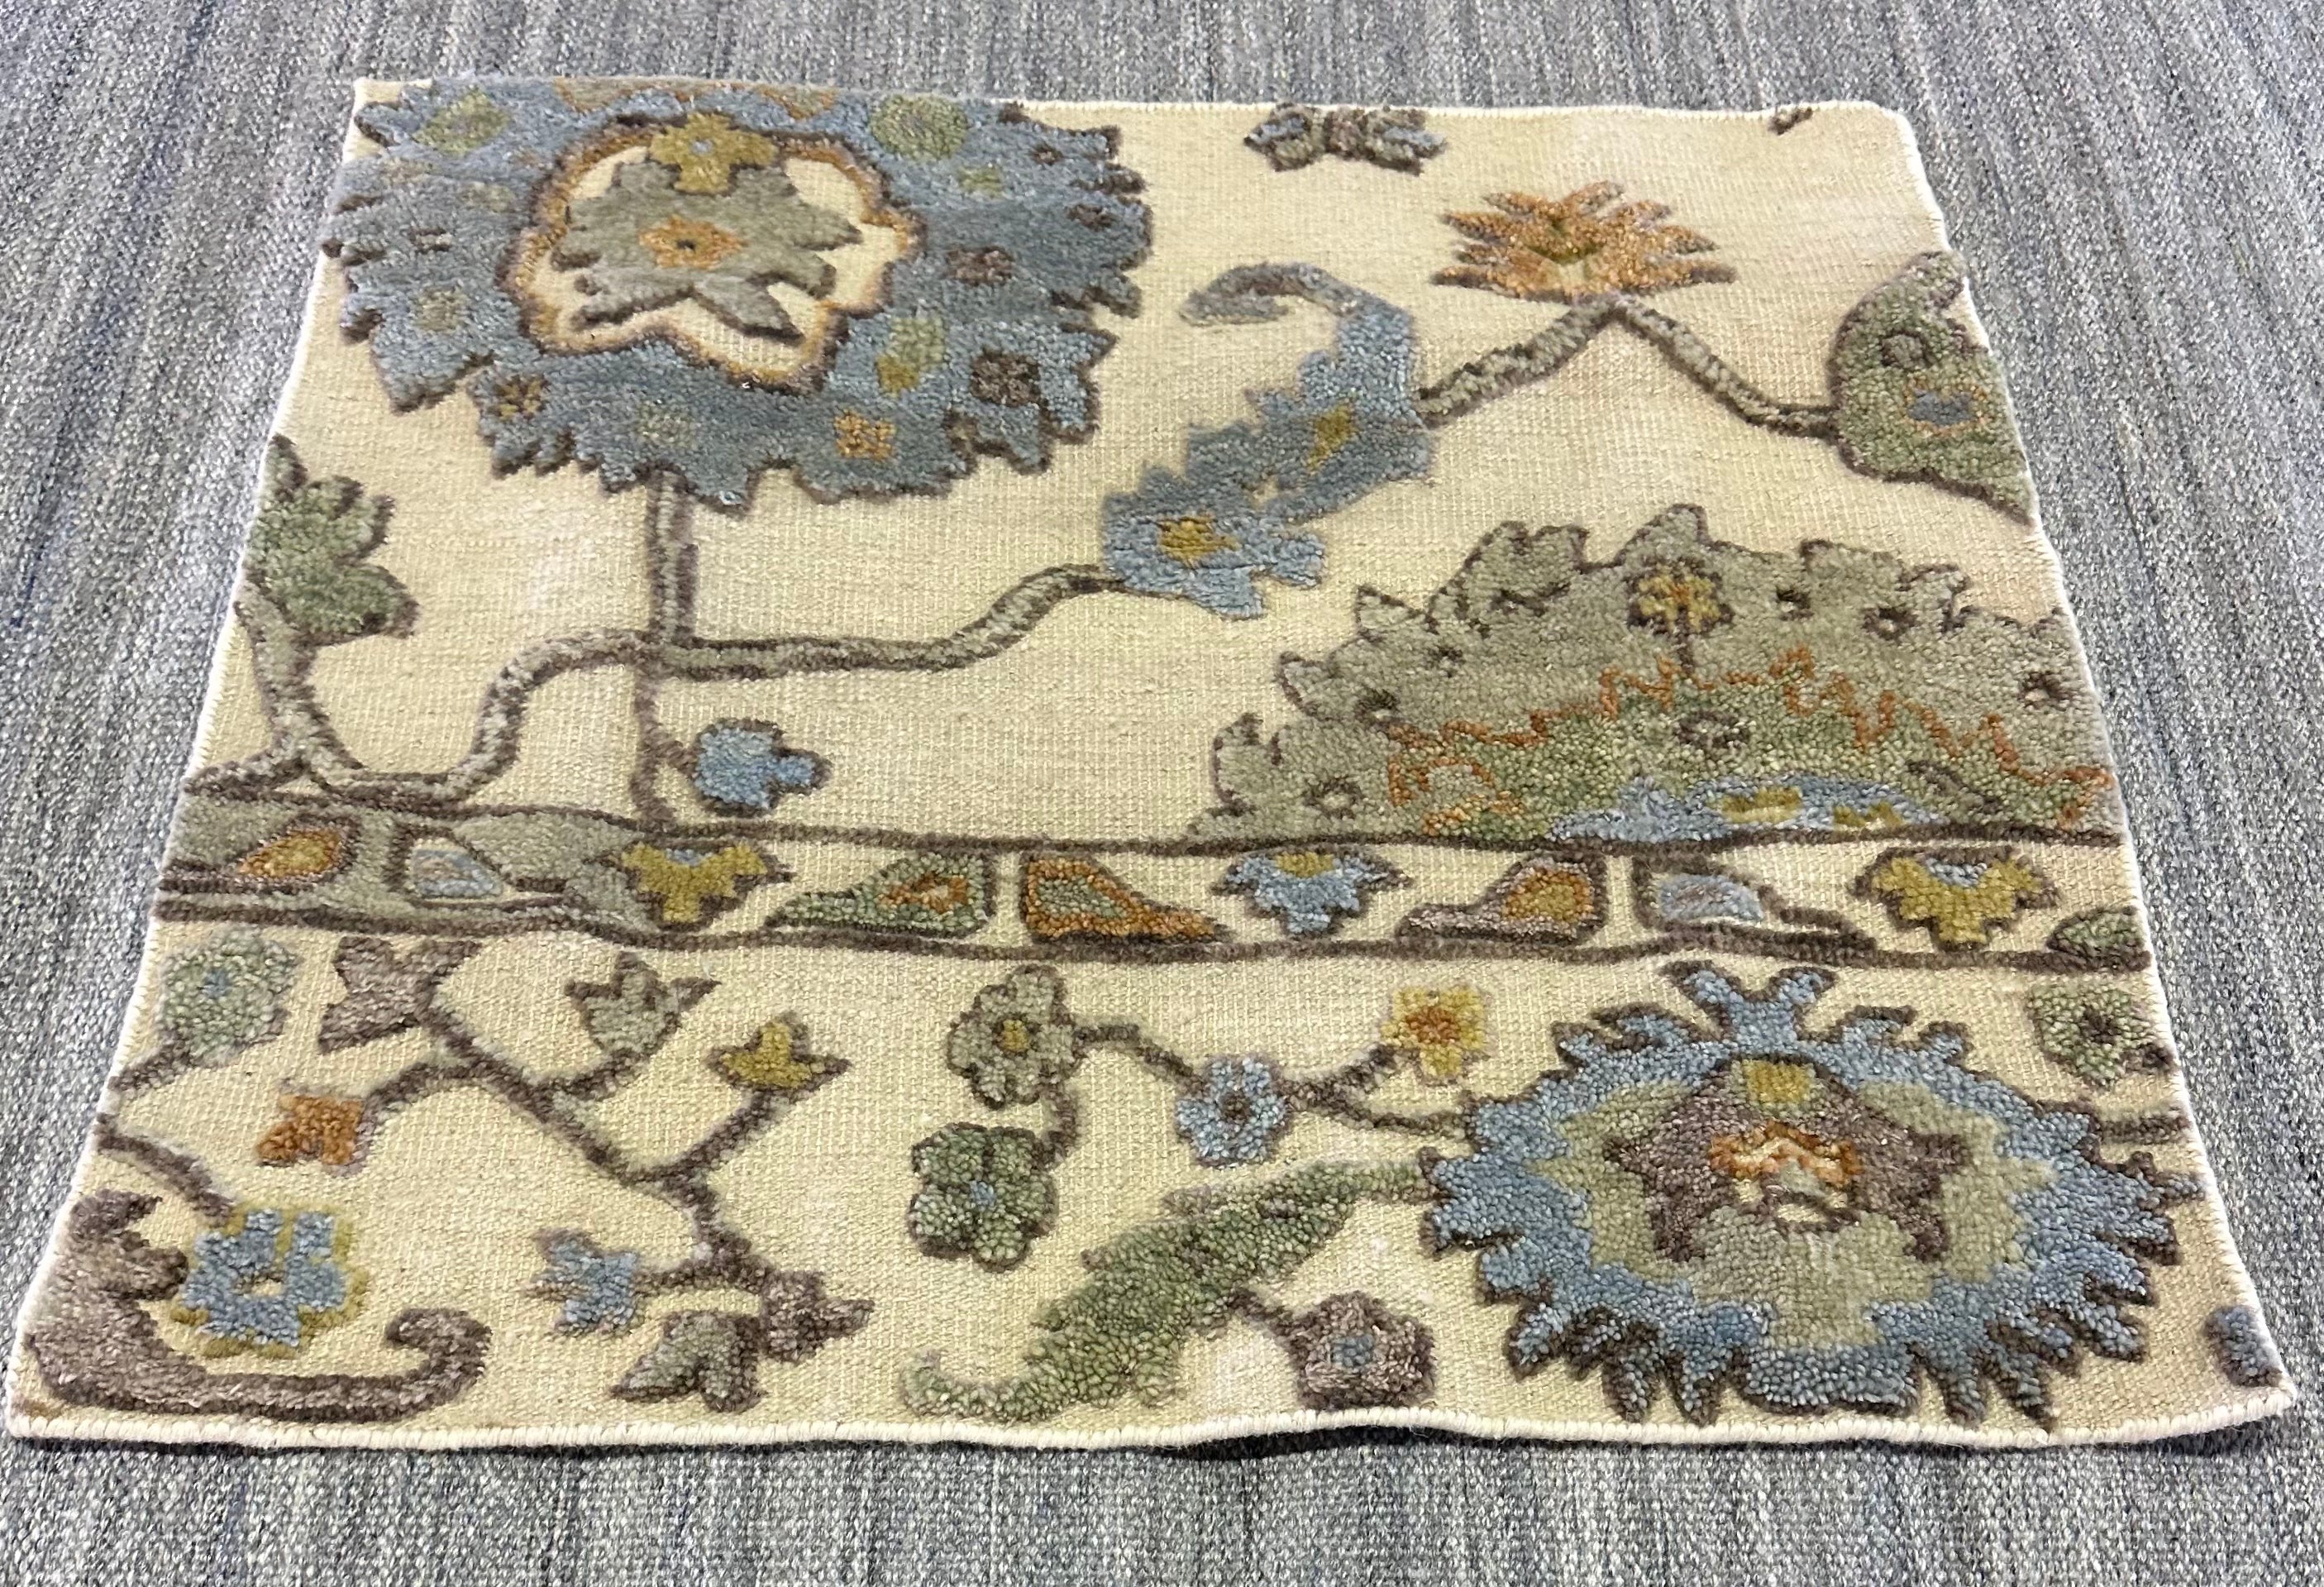 Flower Power 3x3 Ivory & Blue Hand-Knotted Oushak Rug